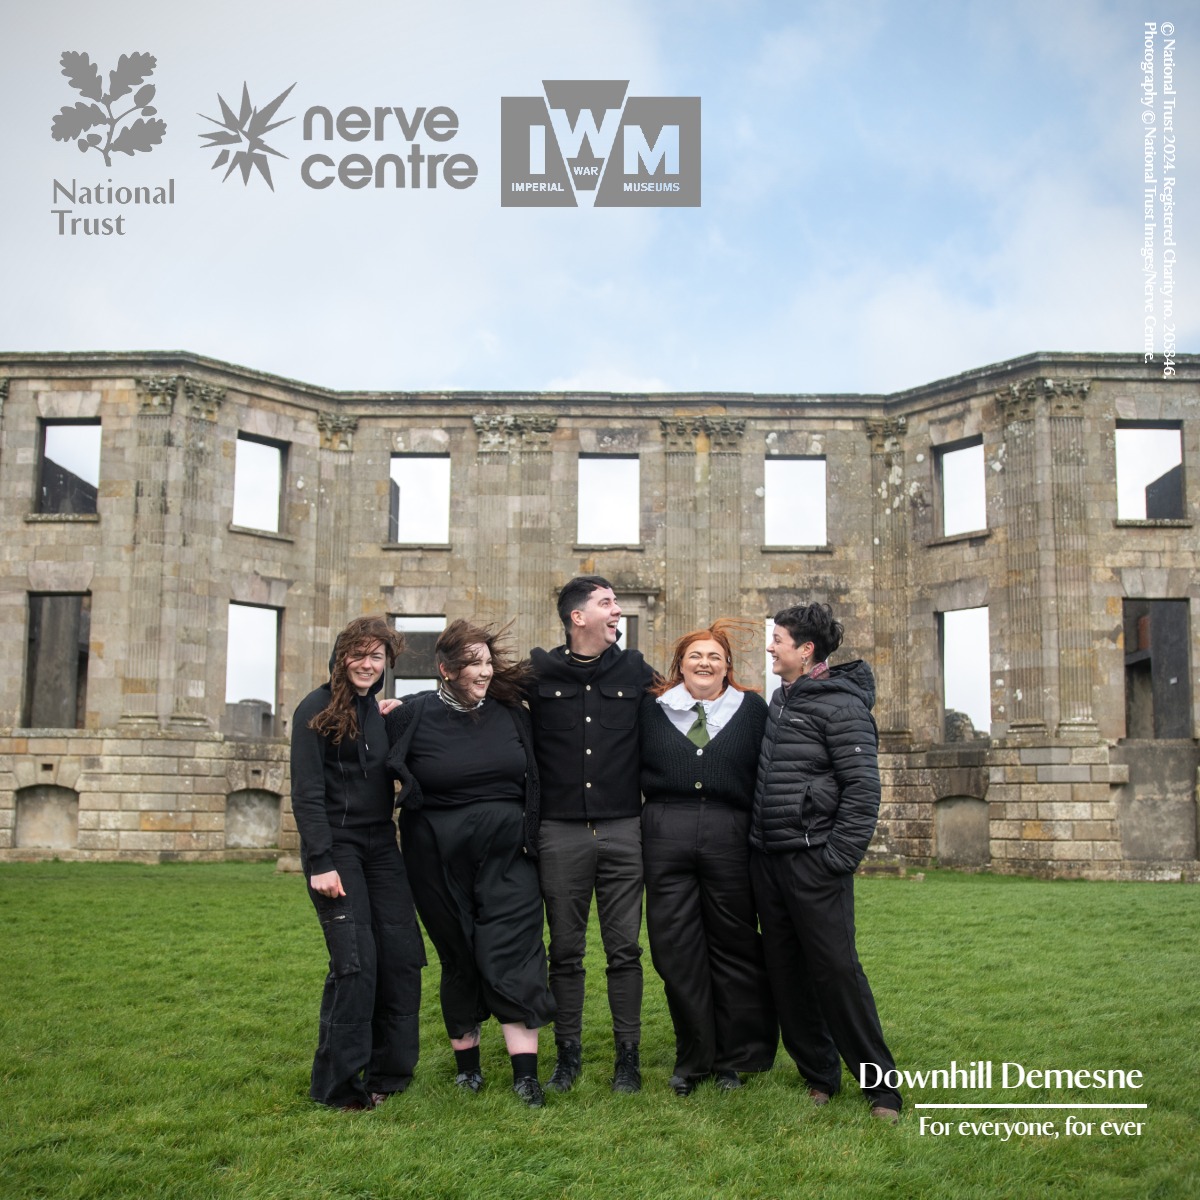 🎨 We're delighted to host @nerve_centre from 17 May at Downhill House. Come along and experience 'We Can Do Better' — a new art installation. Join us for an opening weekend of free events like Seanchoíche storytelling & live music at Mussenden Temple - bit.ly/3UHq9GD